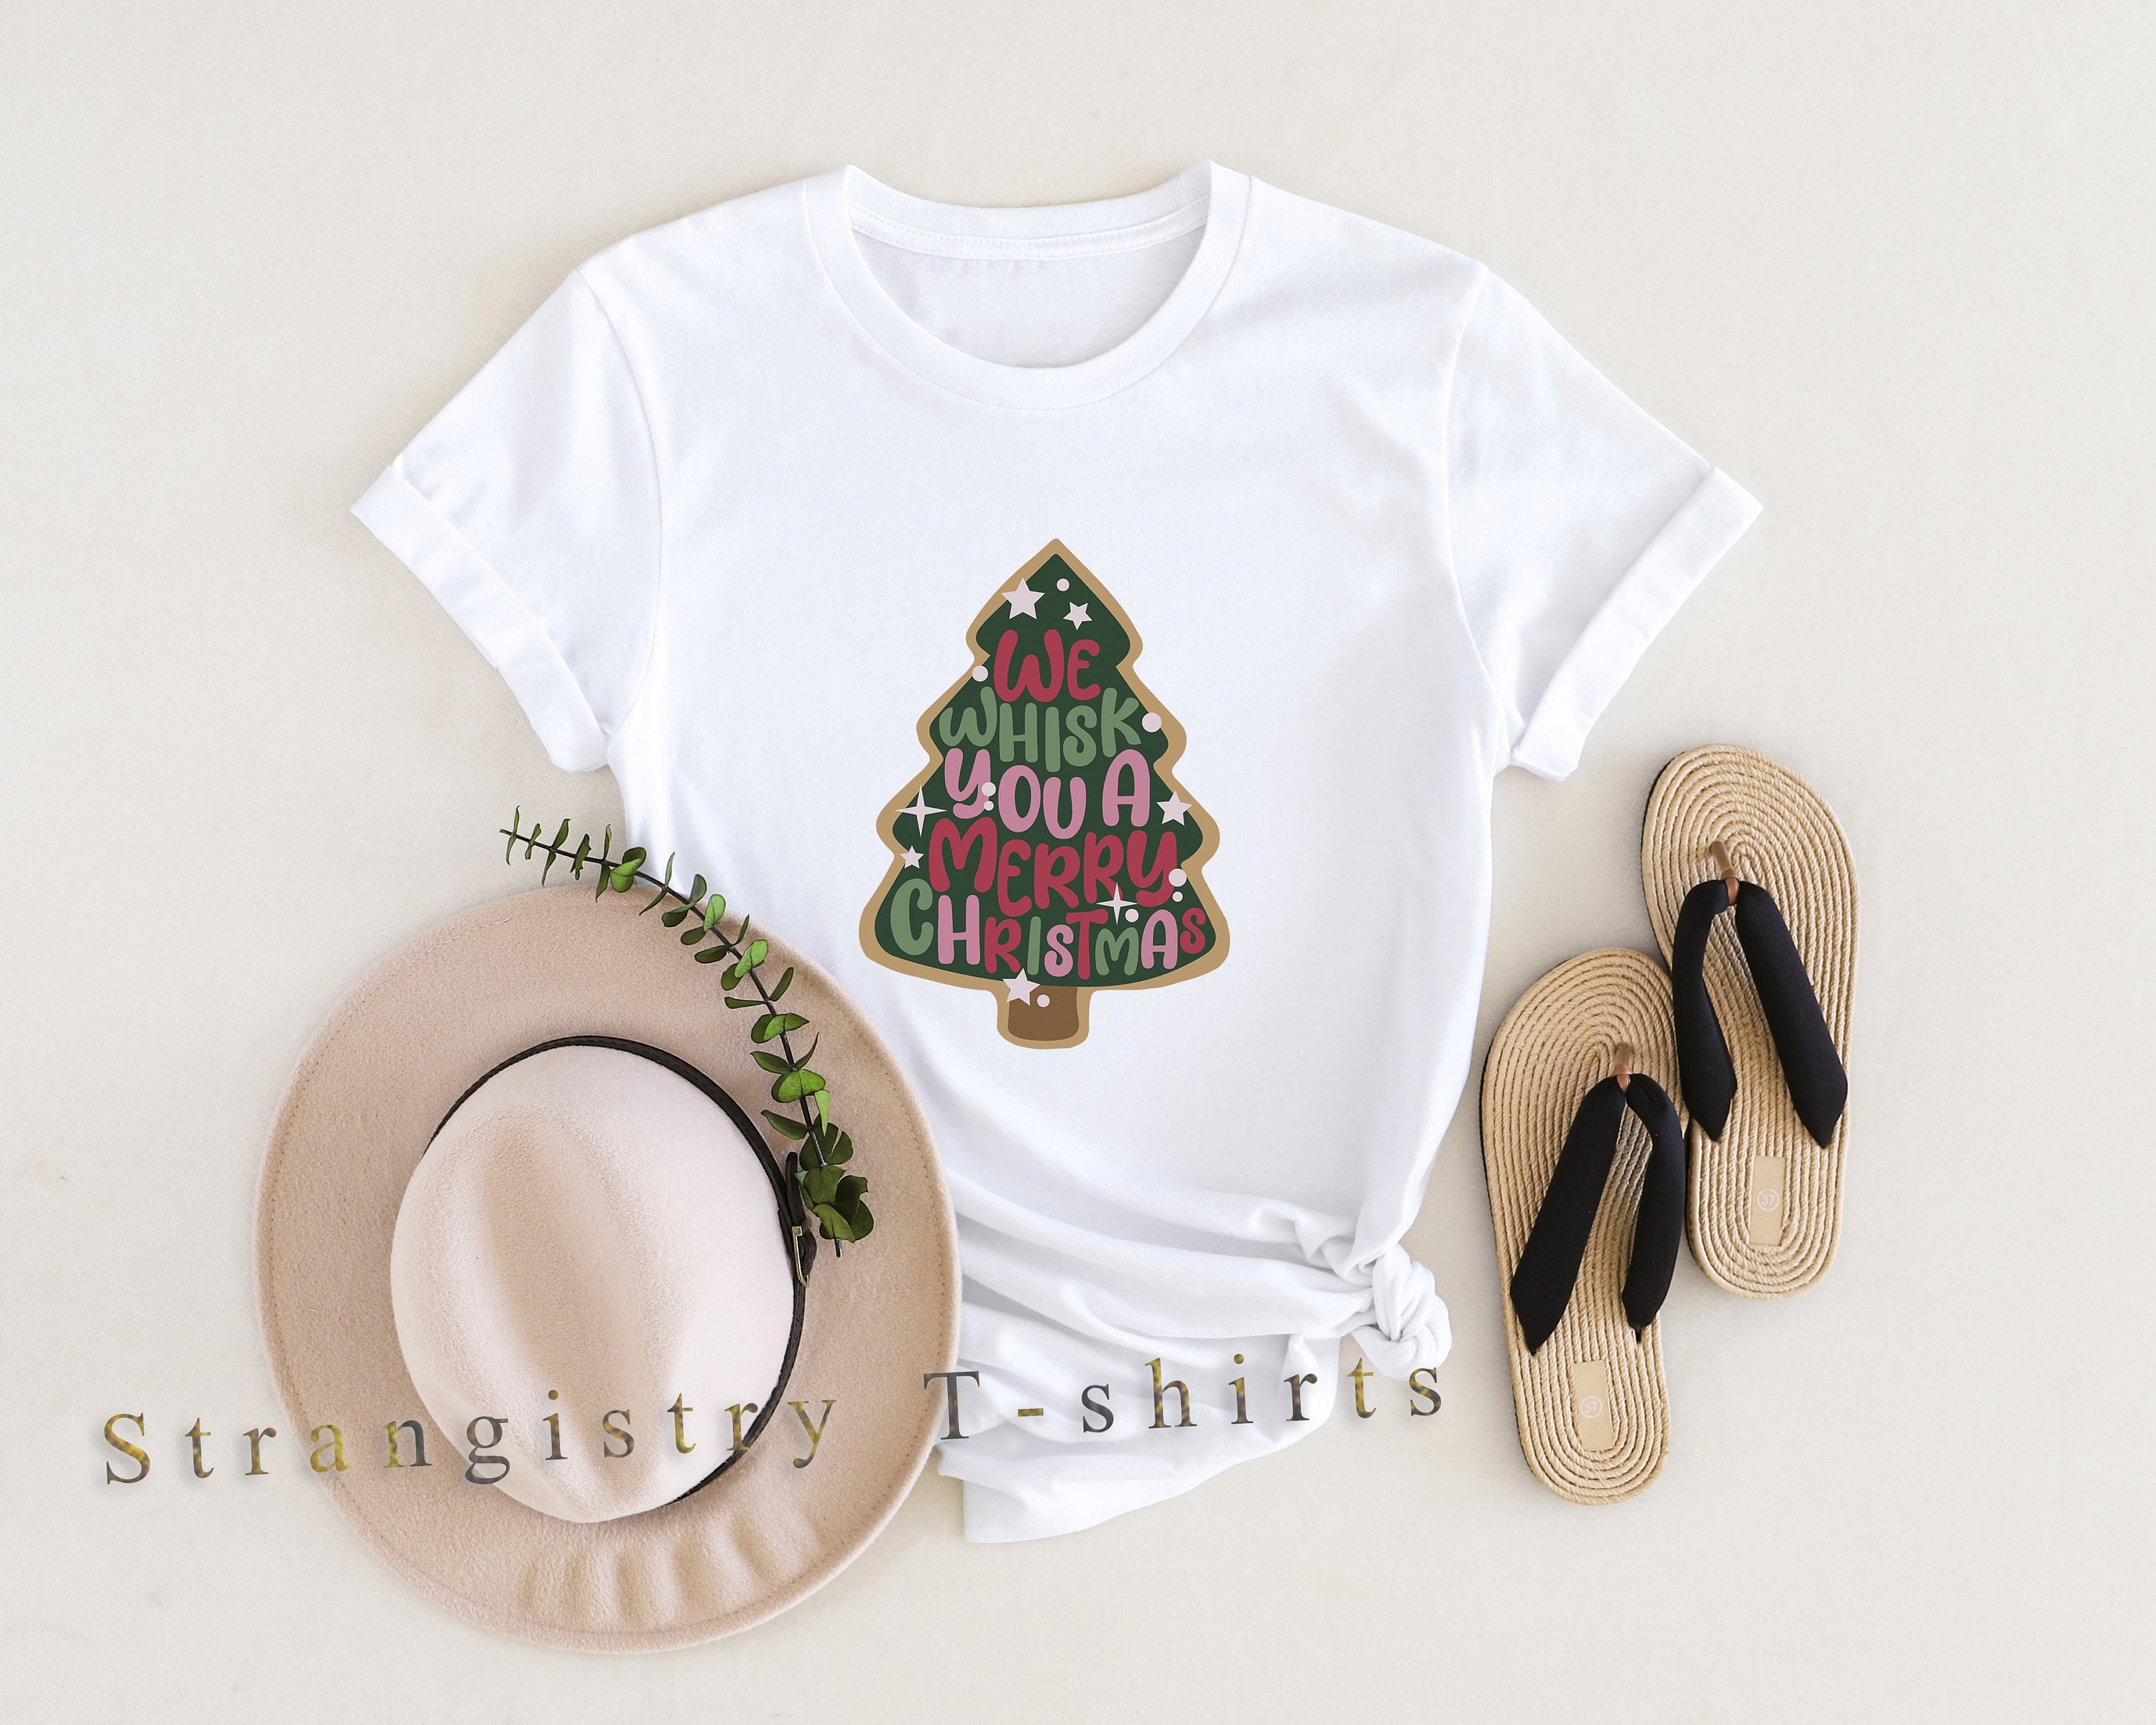 We Whisk You a Marry Christmas Tee, Funny Christmas Shirt,  Christmas Tree Shirt Merry Christmas Shirt, Women Holiday Shirt, Xmas Gifts